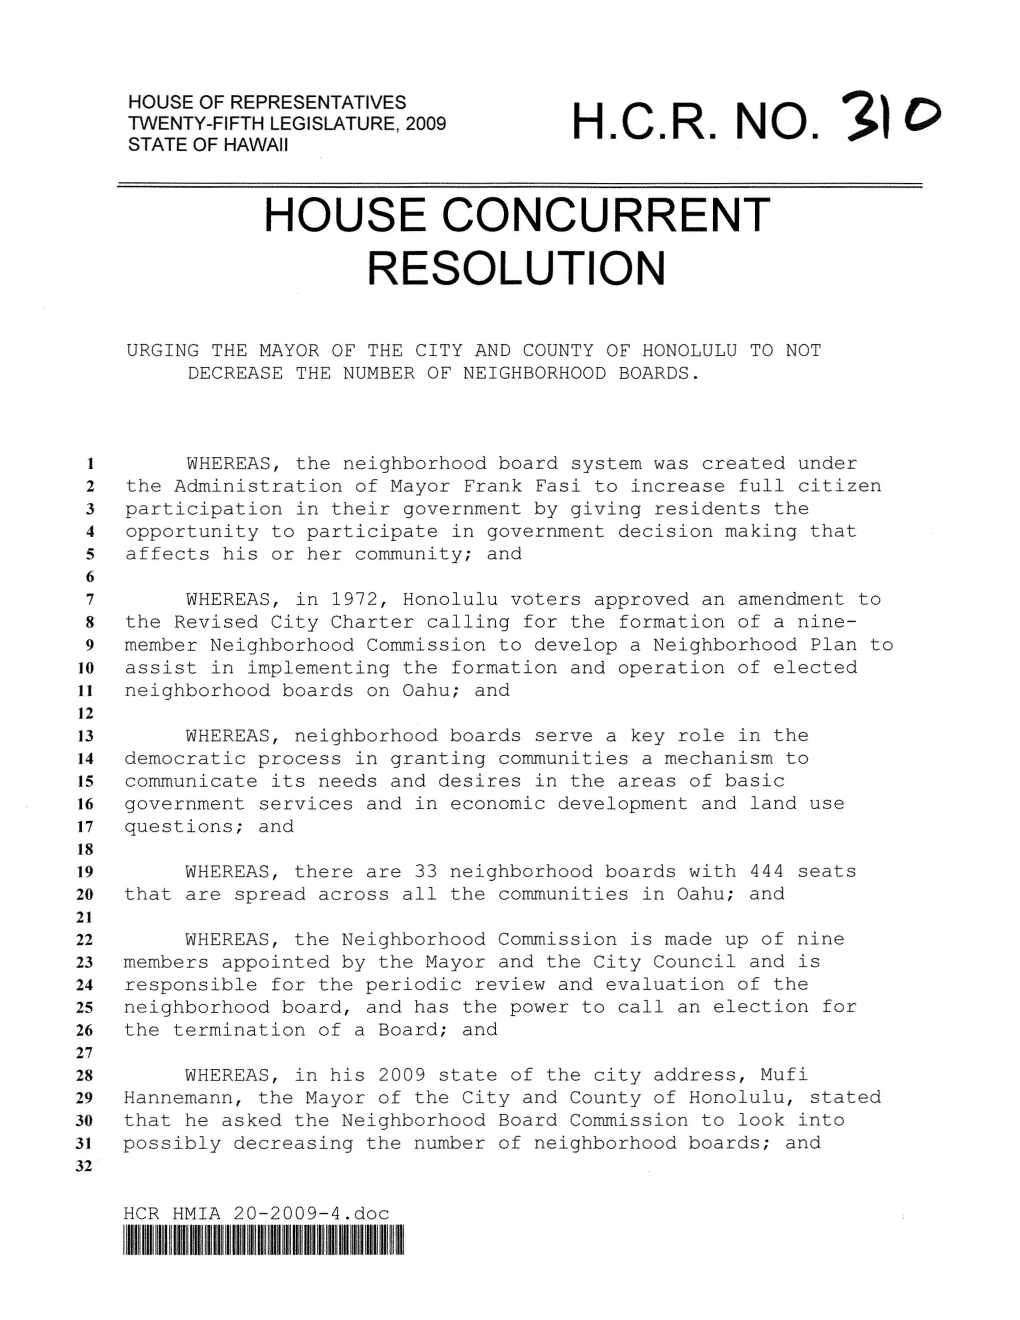 H.C.R. NO. Jl 0 STATE of HAWAII HOUSE CONCURRENT RESOLUTION